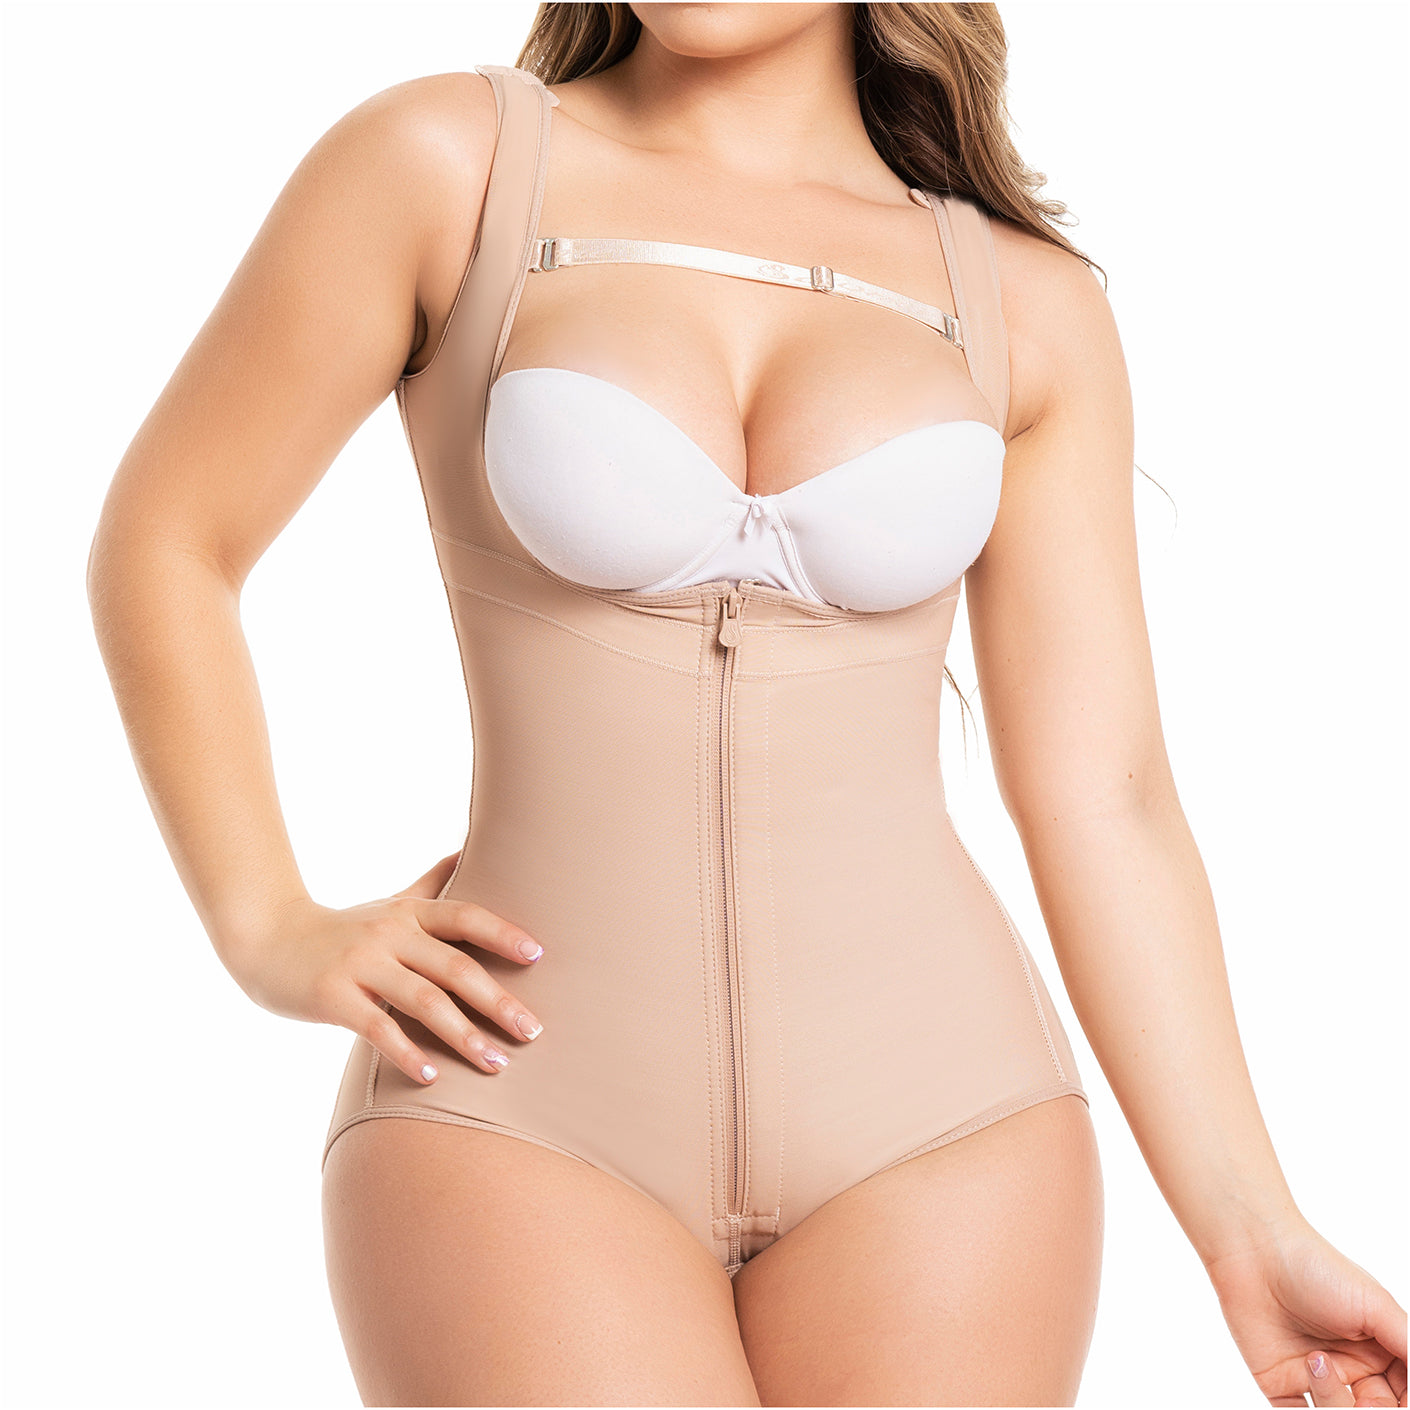 Fajas Colombianas Salome 0212 Body Suit Shaper Thong Reductoras